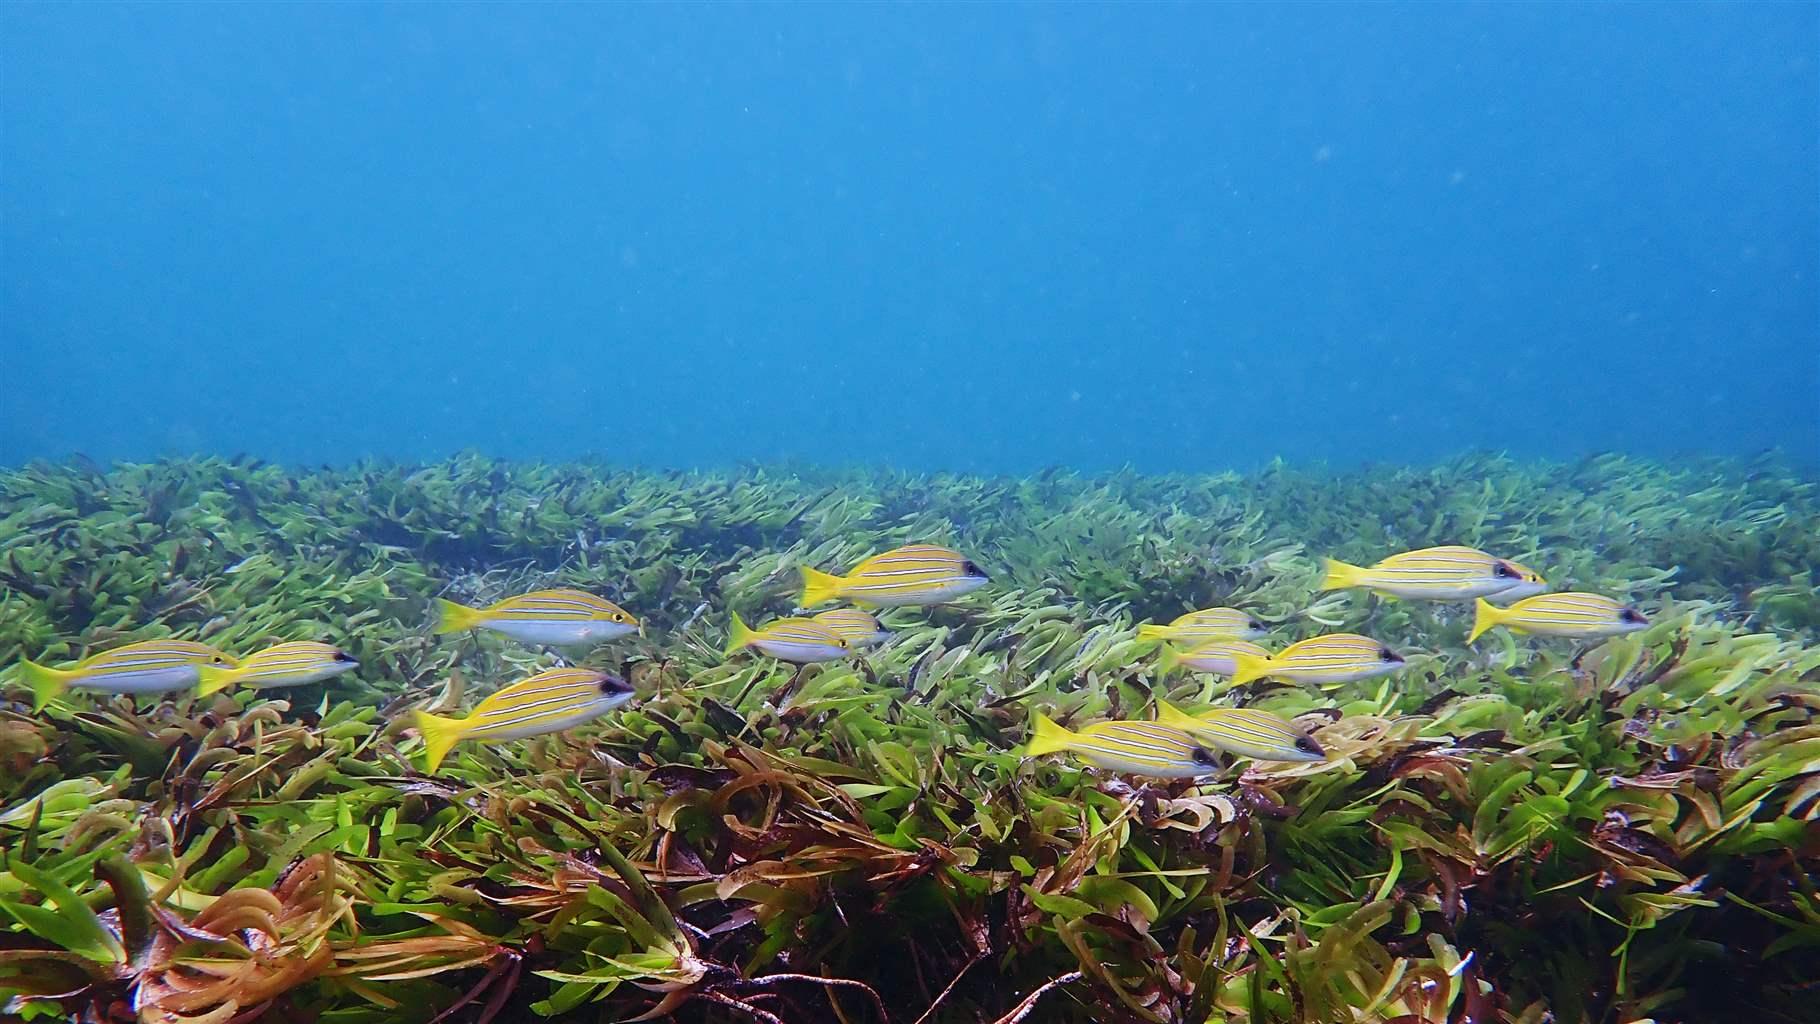 A school of fish swims over a seagrass meadow (Thalassodendron ciliatum), now known locally as gomon zerb levantay. 